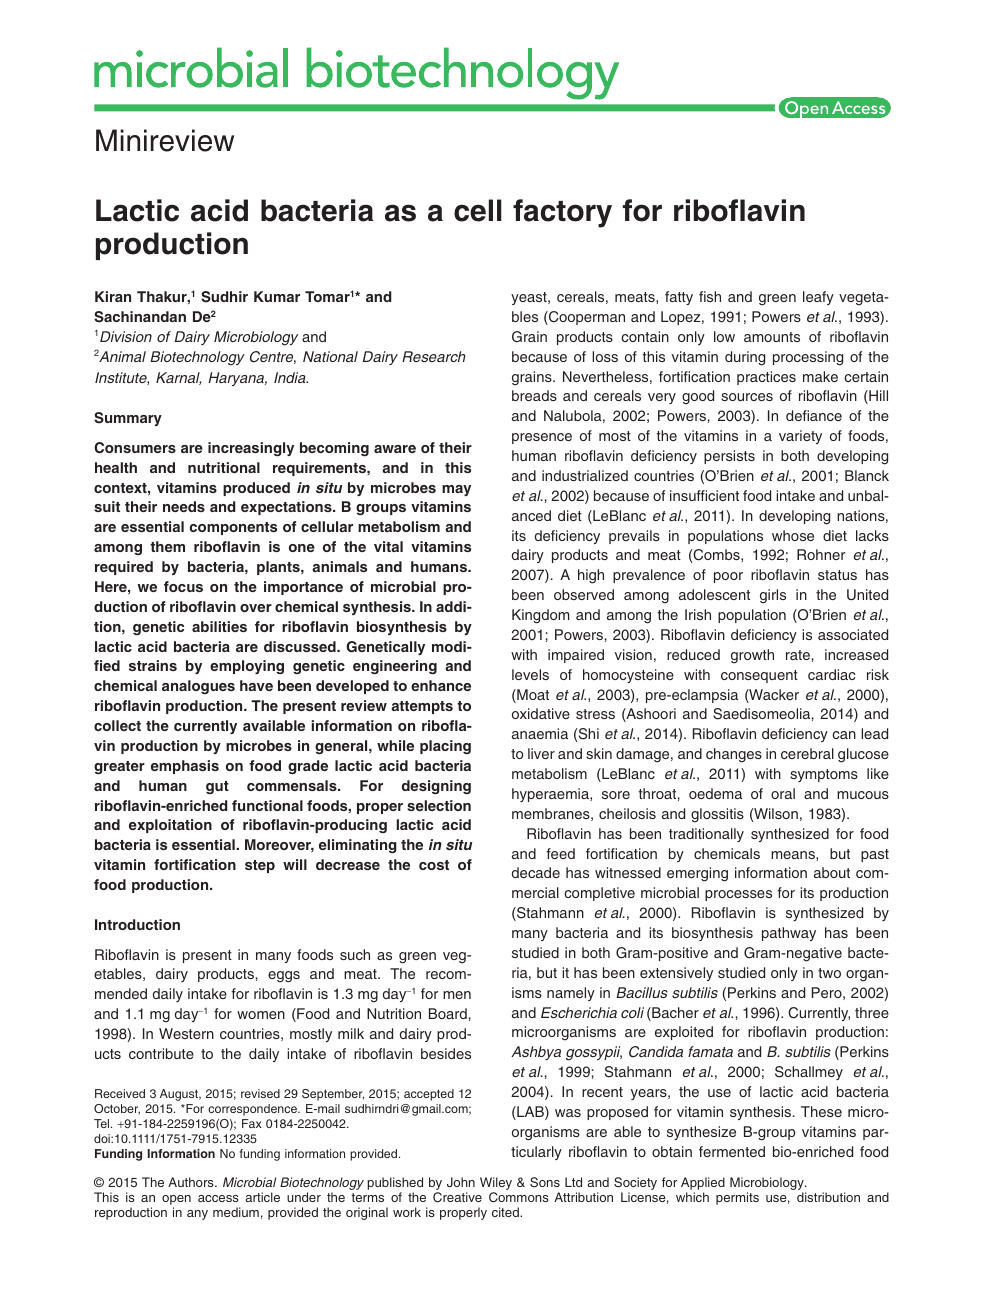 Lactic acid bacteria as a cell factory for riboflavin production – topic of research  paper in Animal and dairy science. Download scholarly article PDF and read  for free on CyberLeninka open science